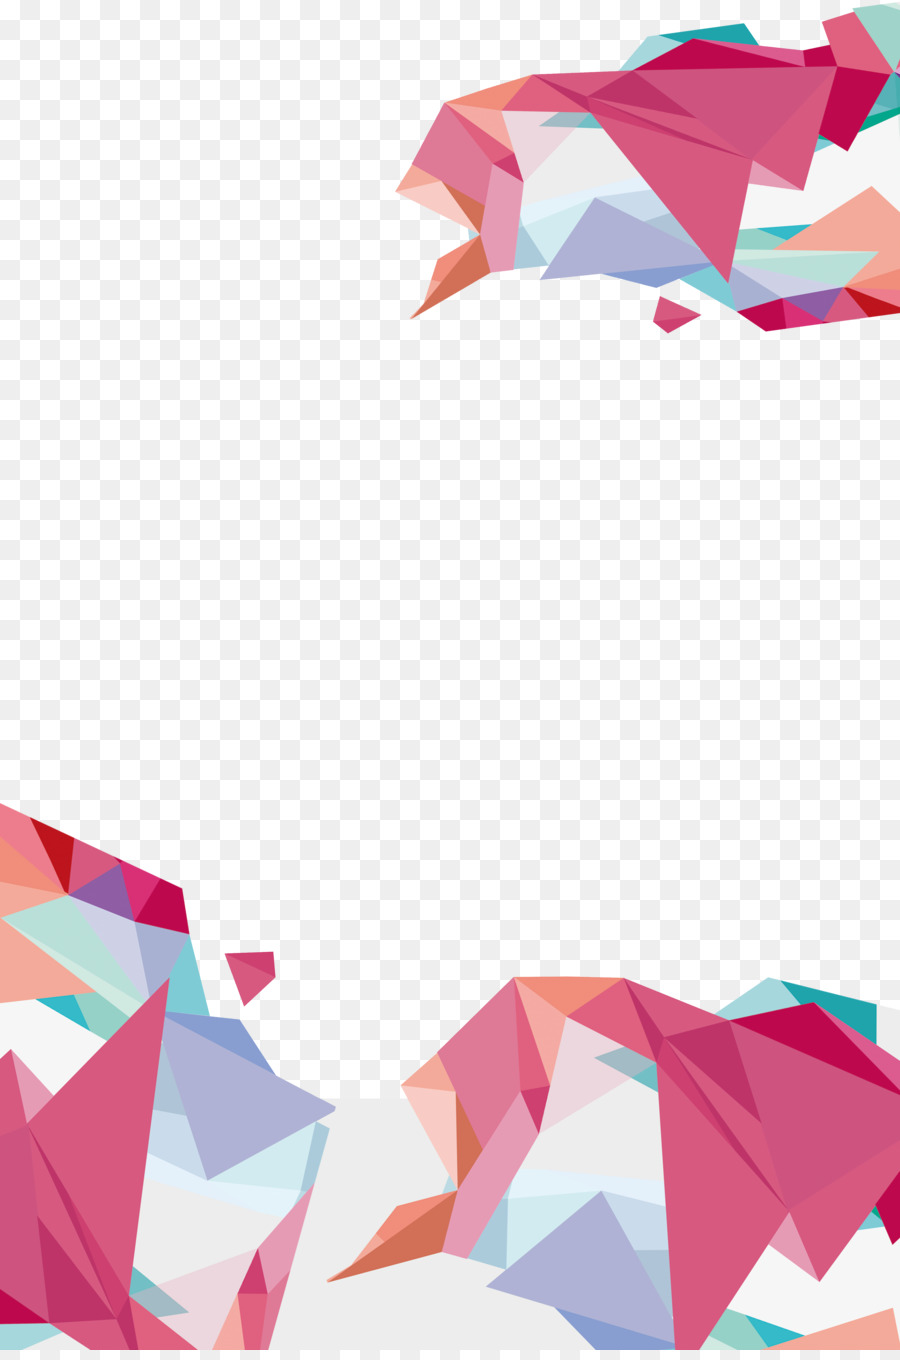 geometric shape background png download 3543 5315 free transparent geometry png download cleanpng kisspng geometric shape background png download